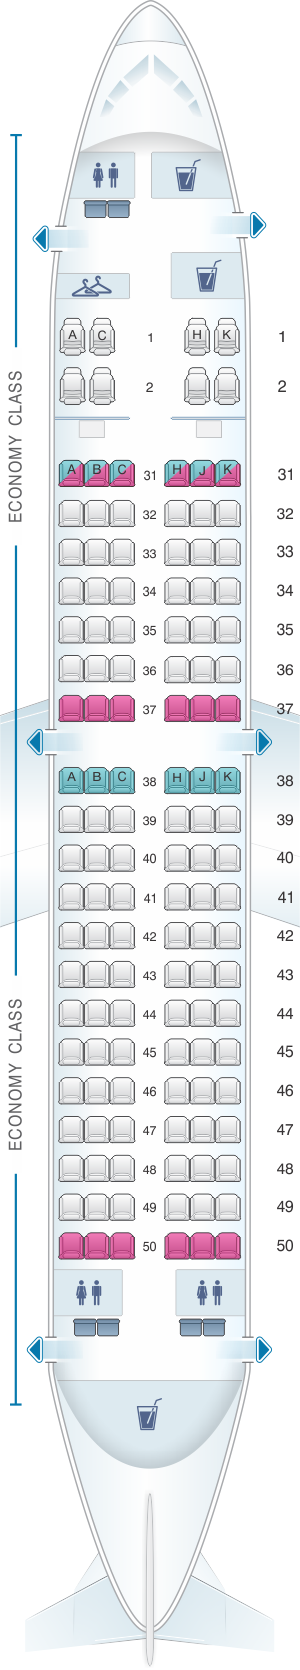 33++ Hainan airlines boeing 737 800 seating chart